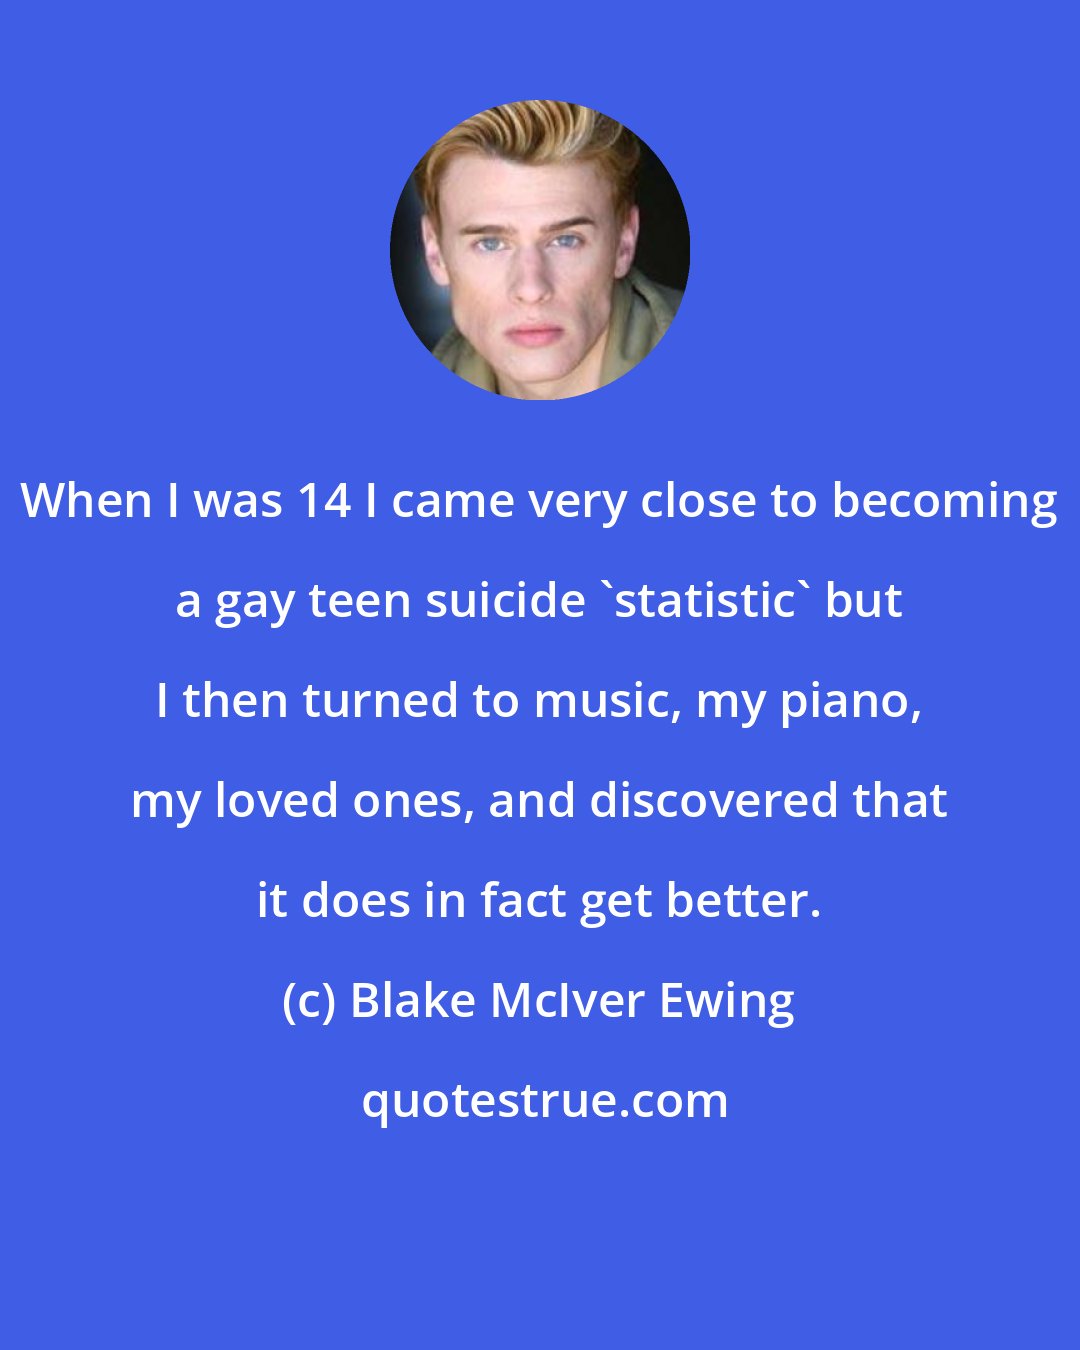 Blake McIver Ewing: When I was 14 I came very close to becoming a gay teen suicide 'statistic' but I then turned to music, my piano, my loved ones, and discovered that it does in fact get better.